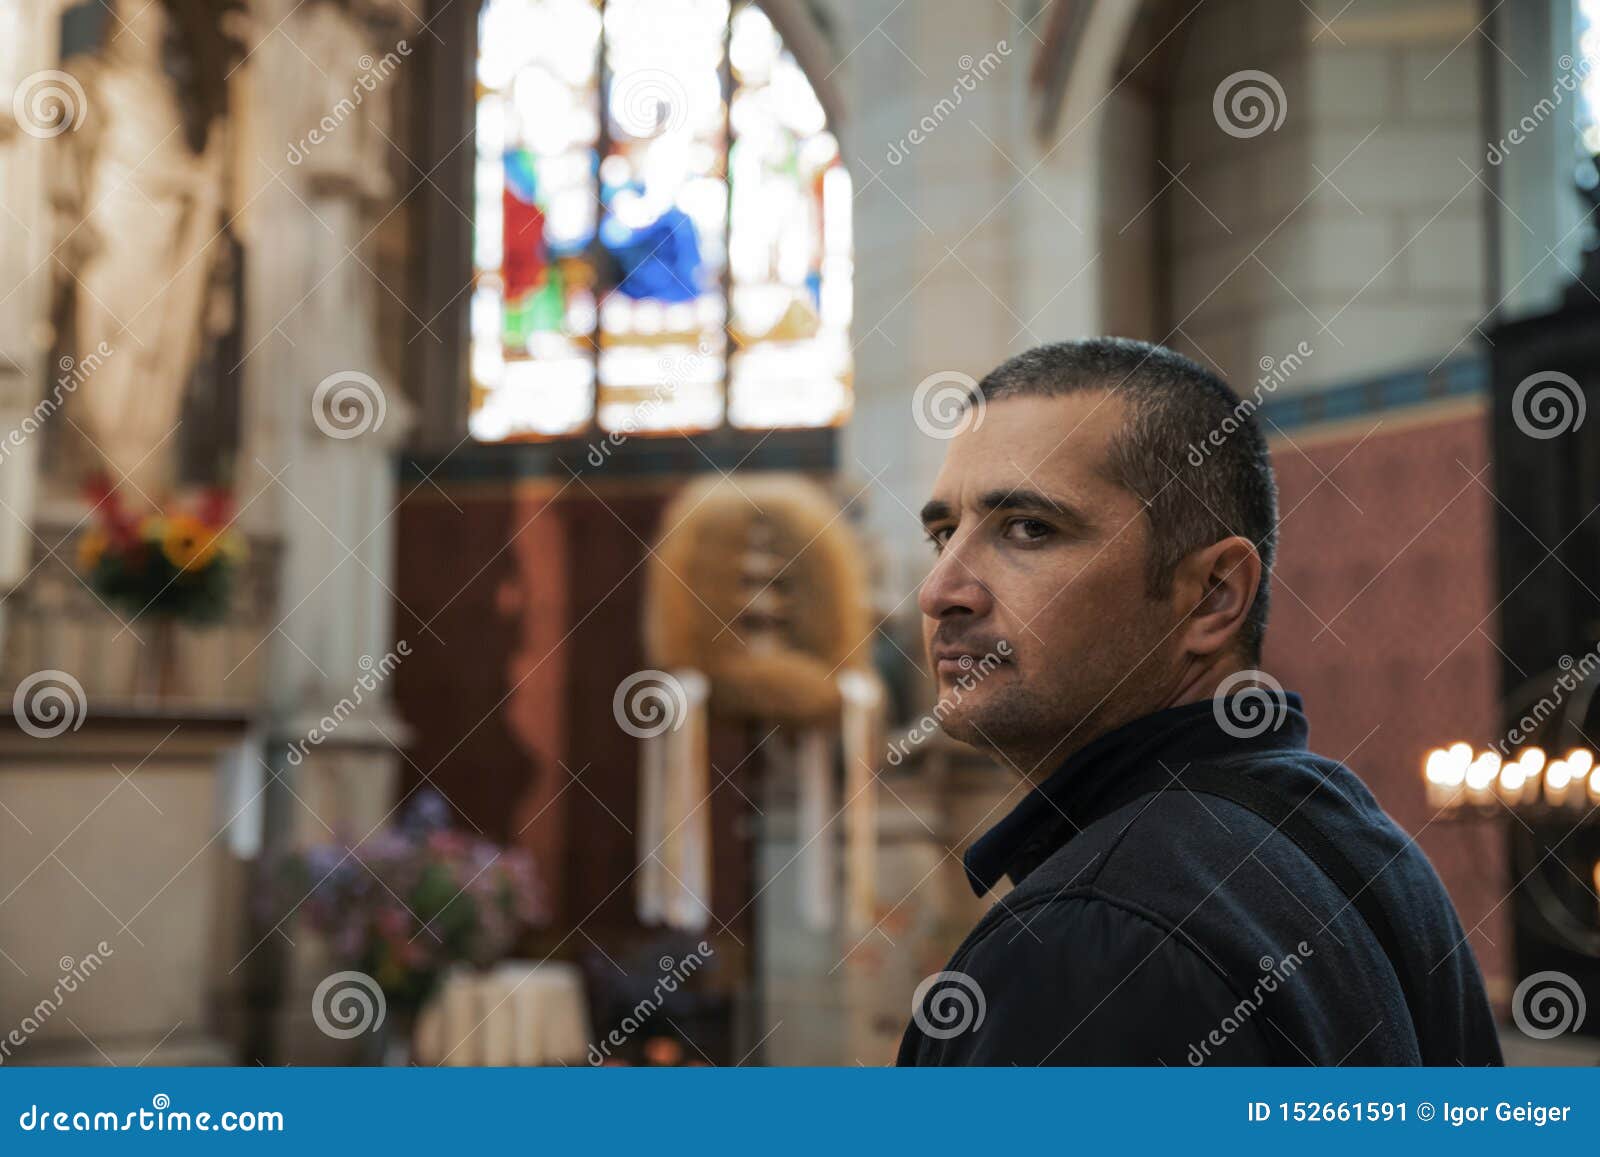 young black-haired man in a catholic church enthusiastically sights